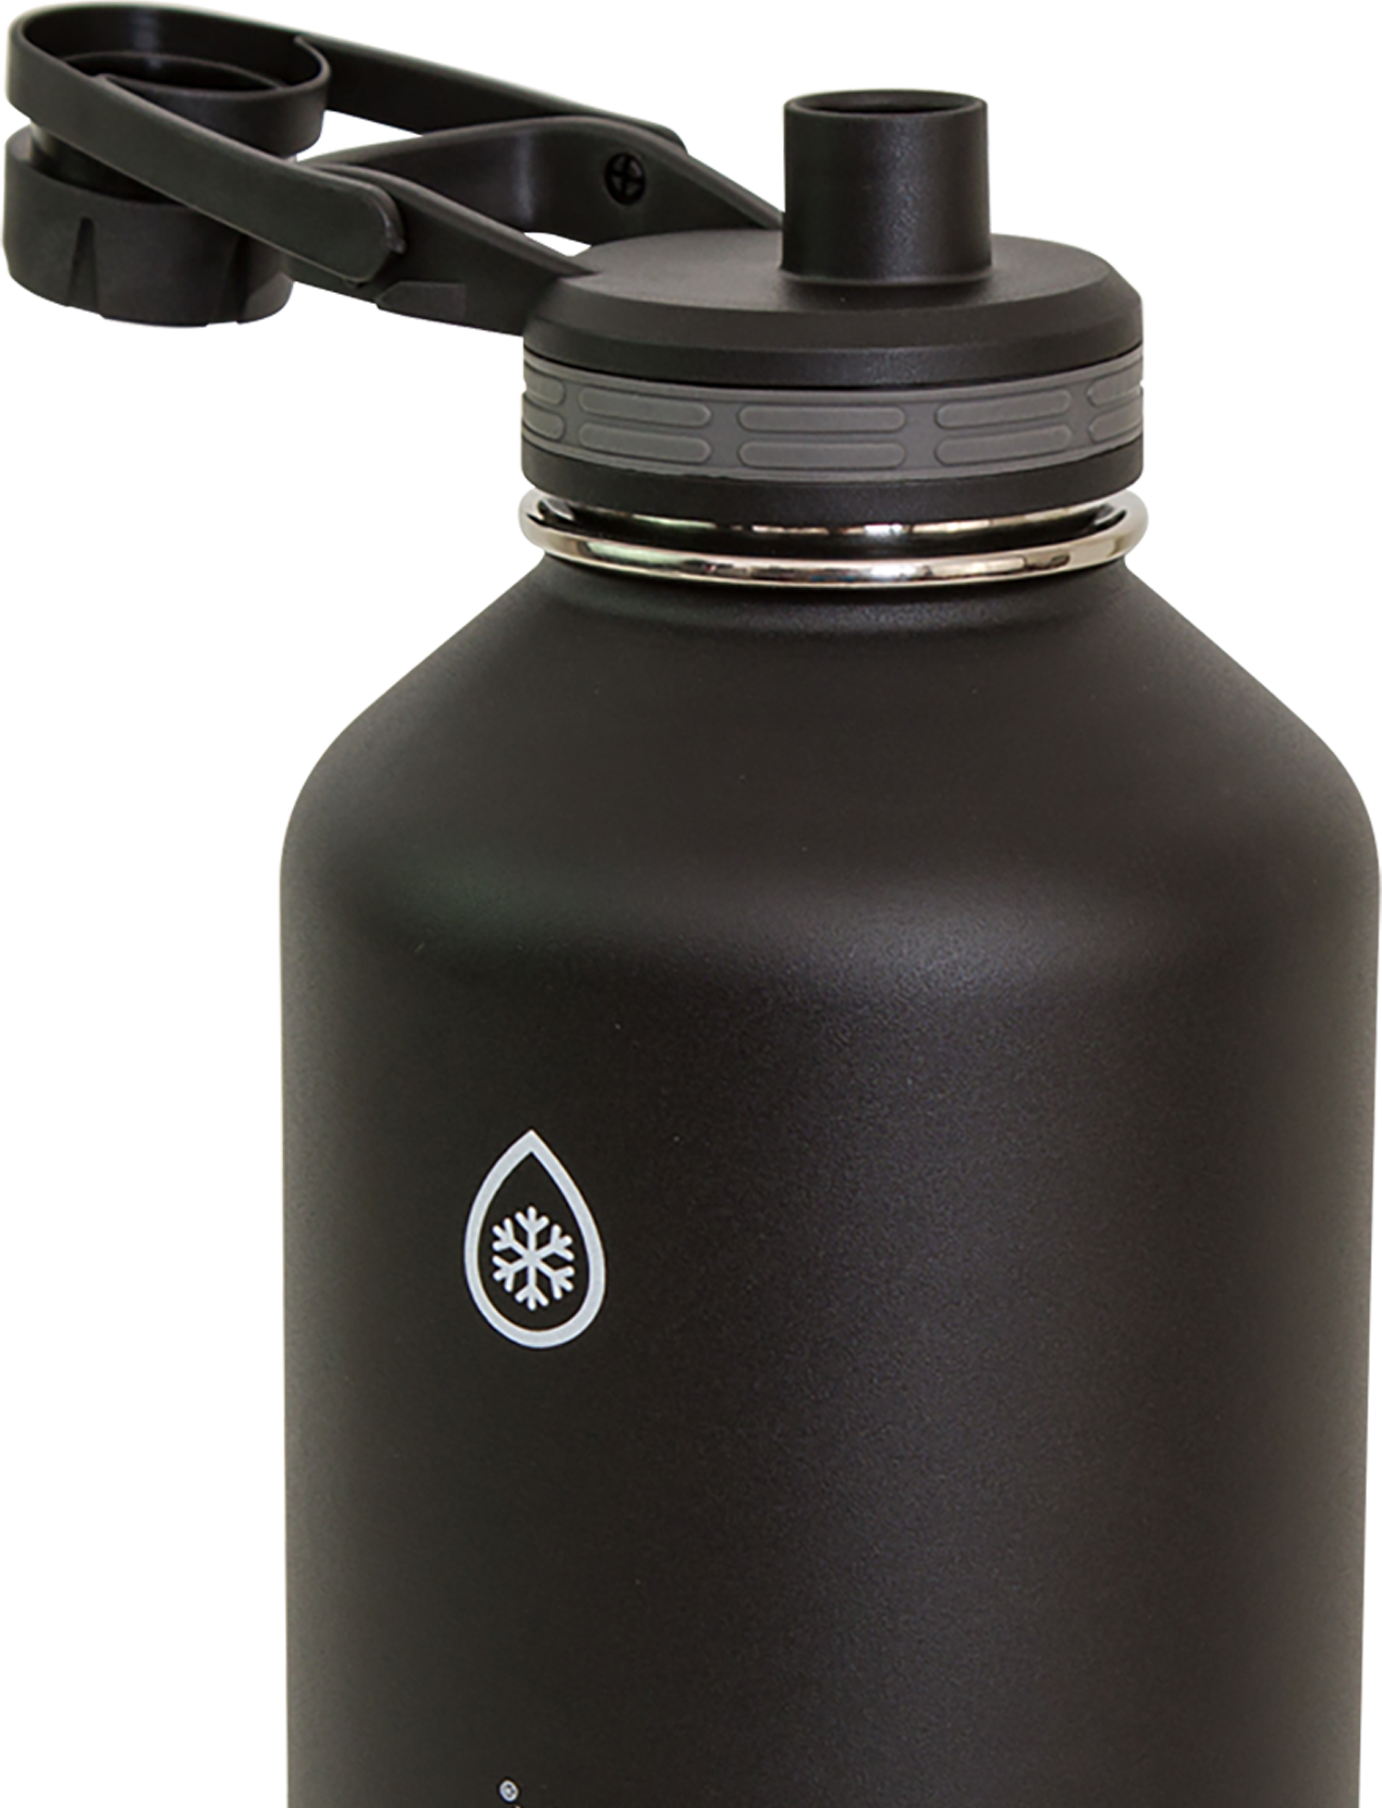 thermos water bottle 64 oz with